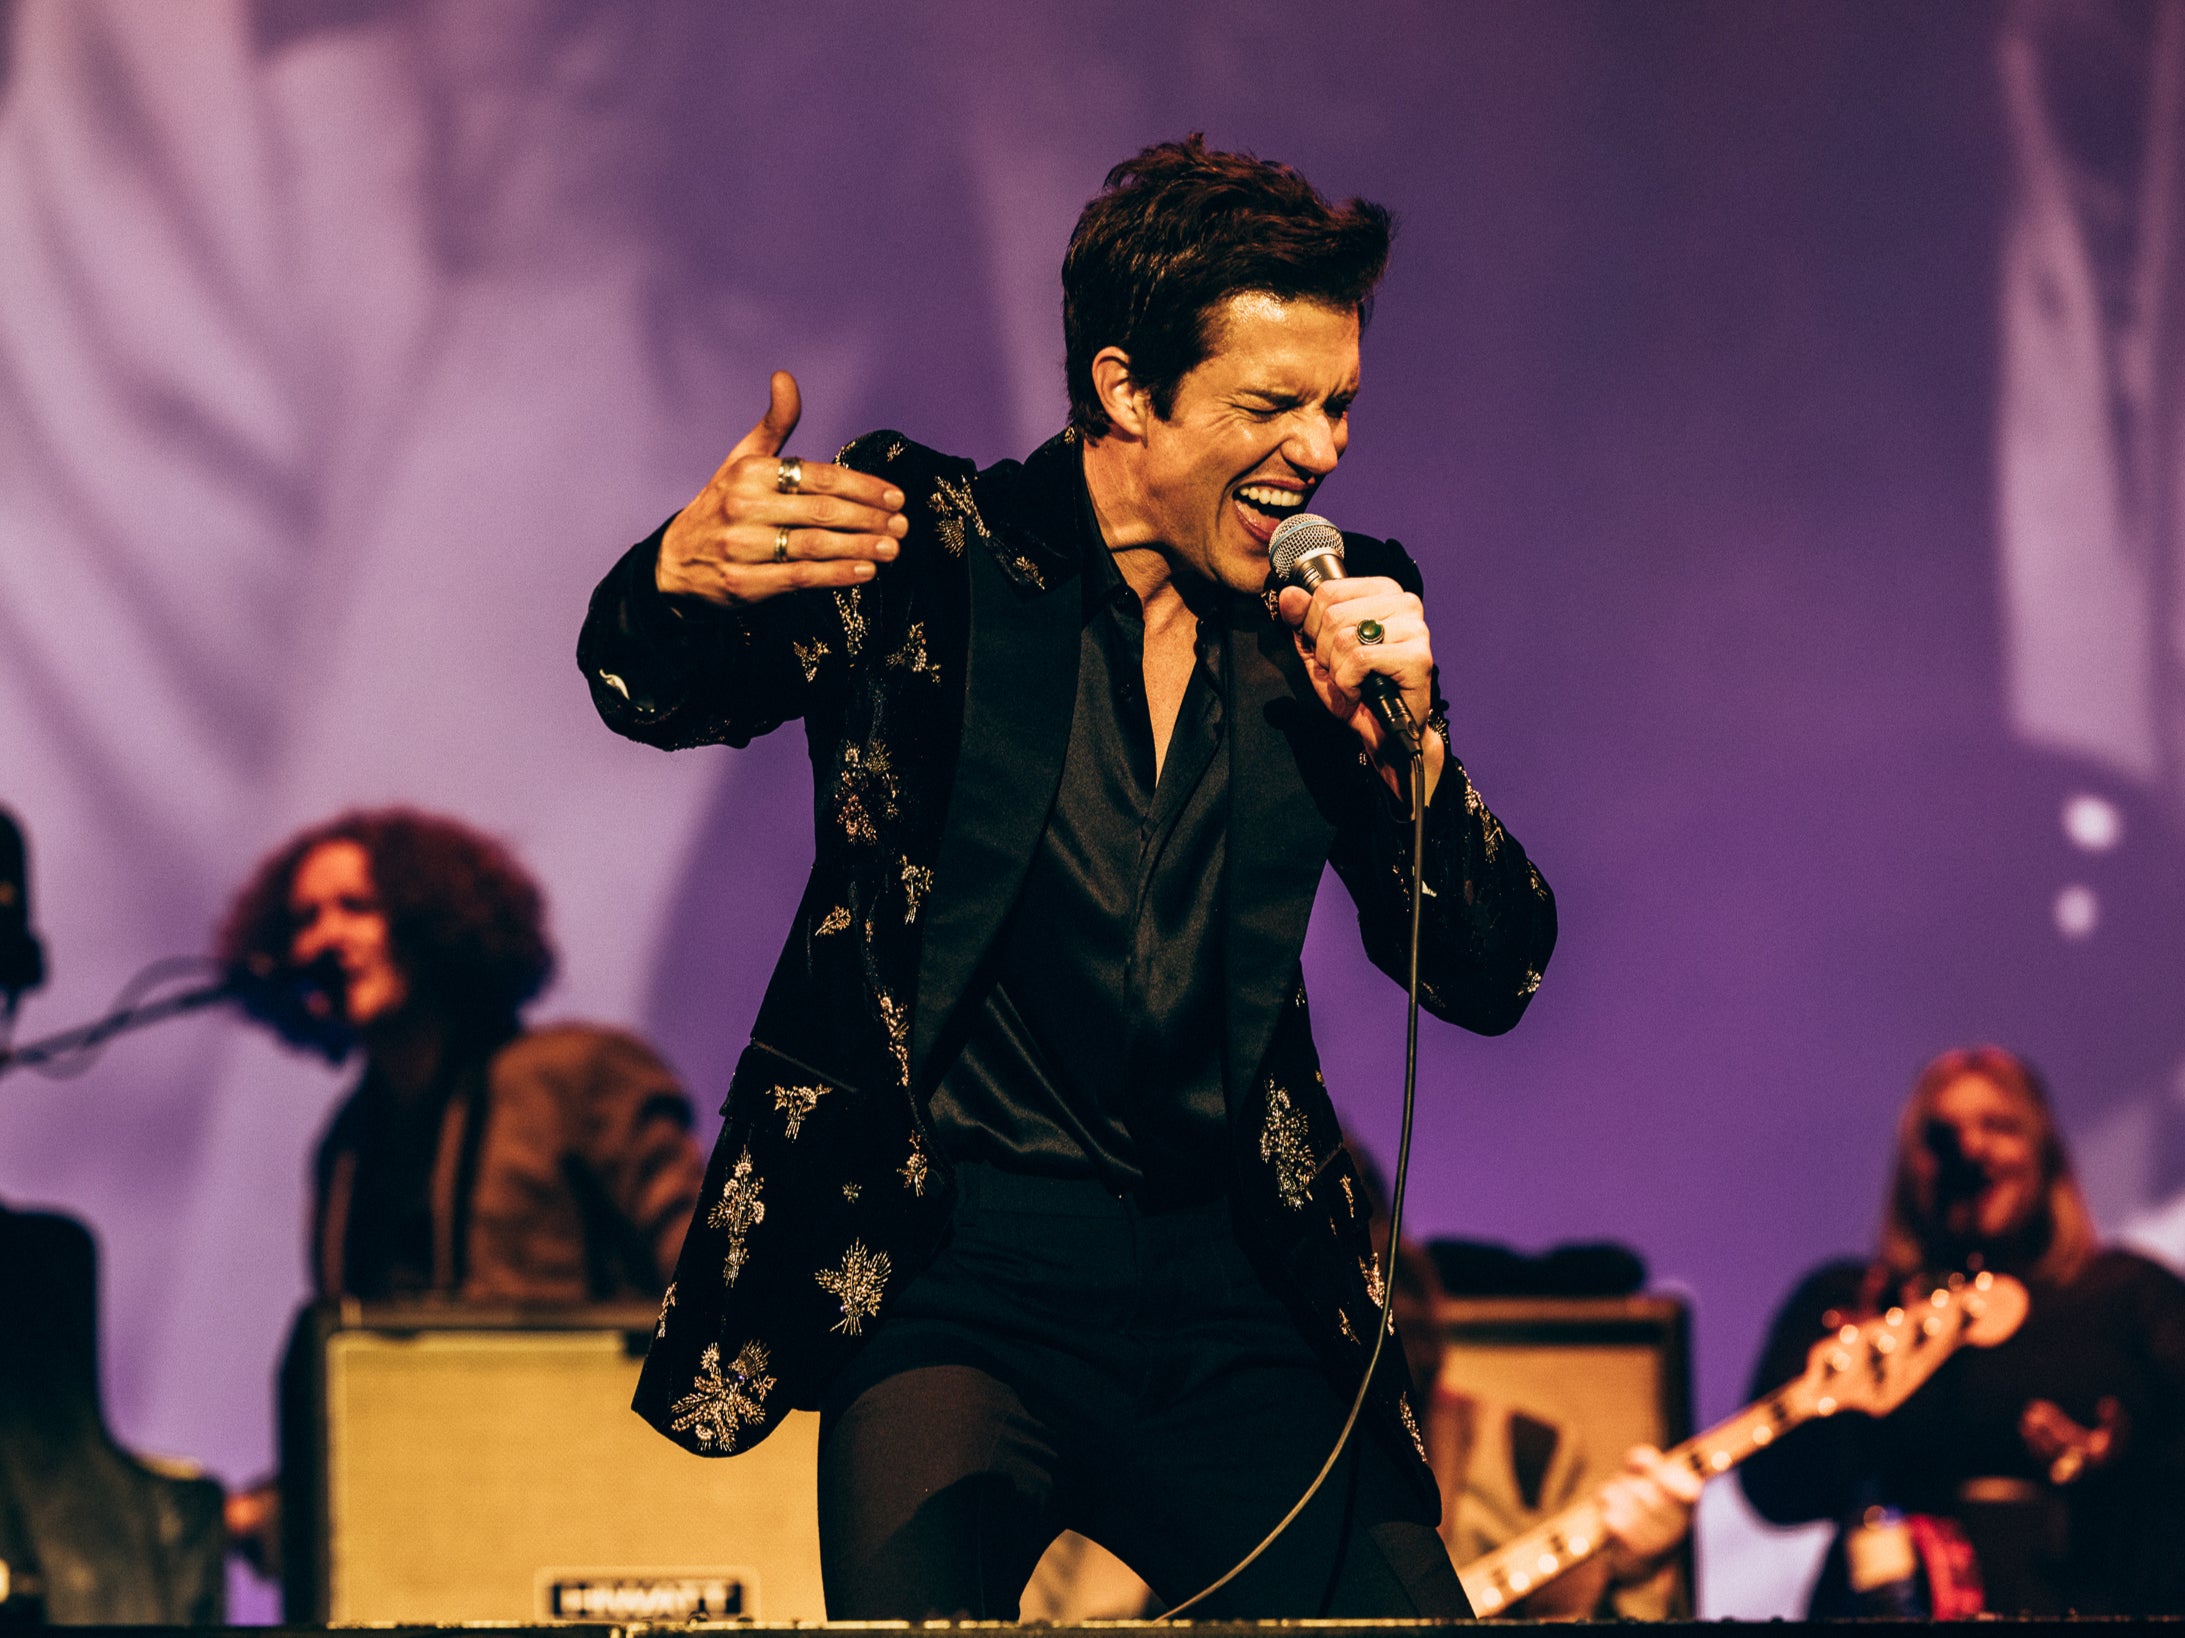 The Killers frontman Brandon Flowers performs at this year’s Reading Festival